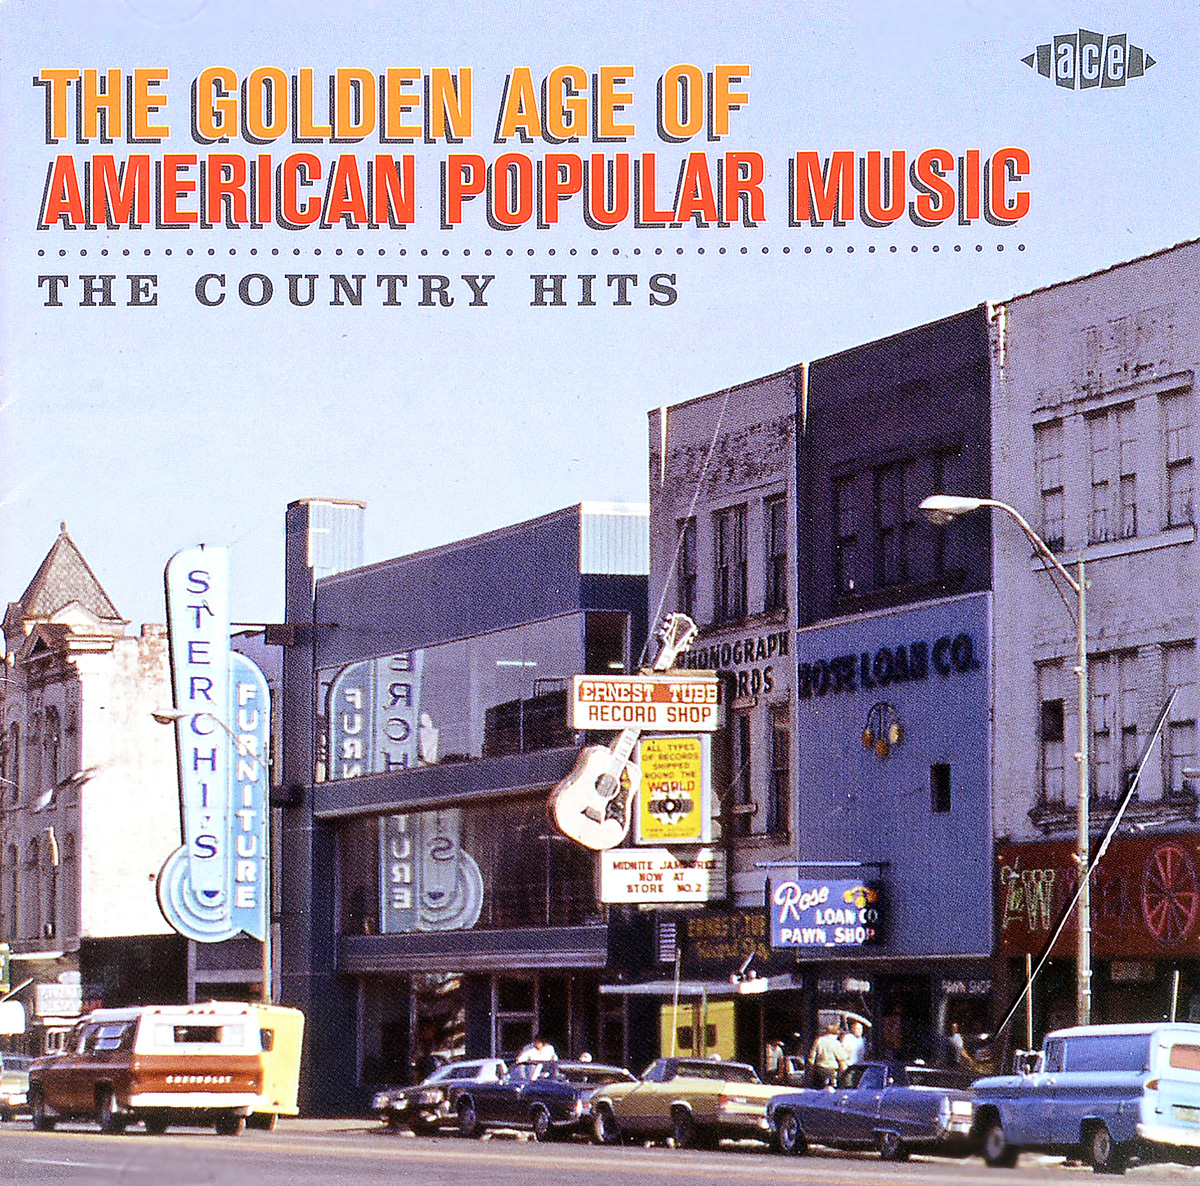 The Golden Age Of American Popular Music - The Country Hits